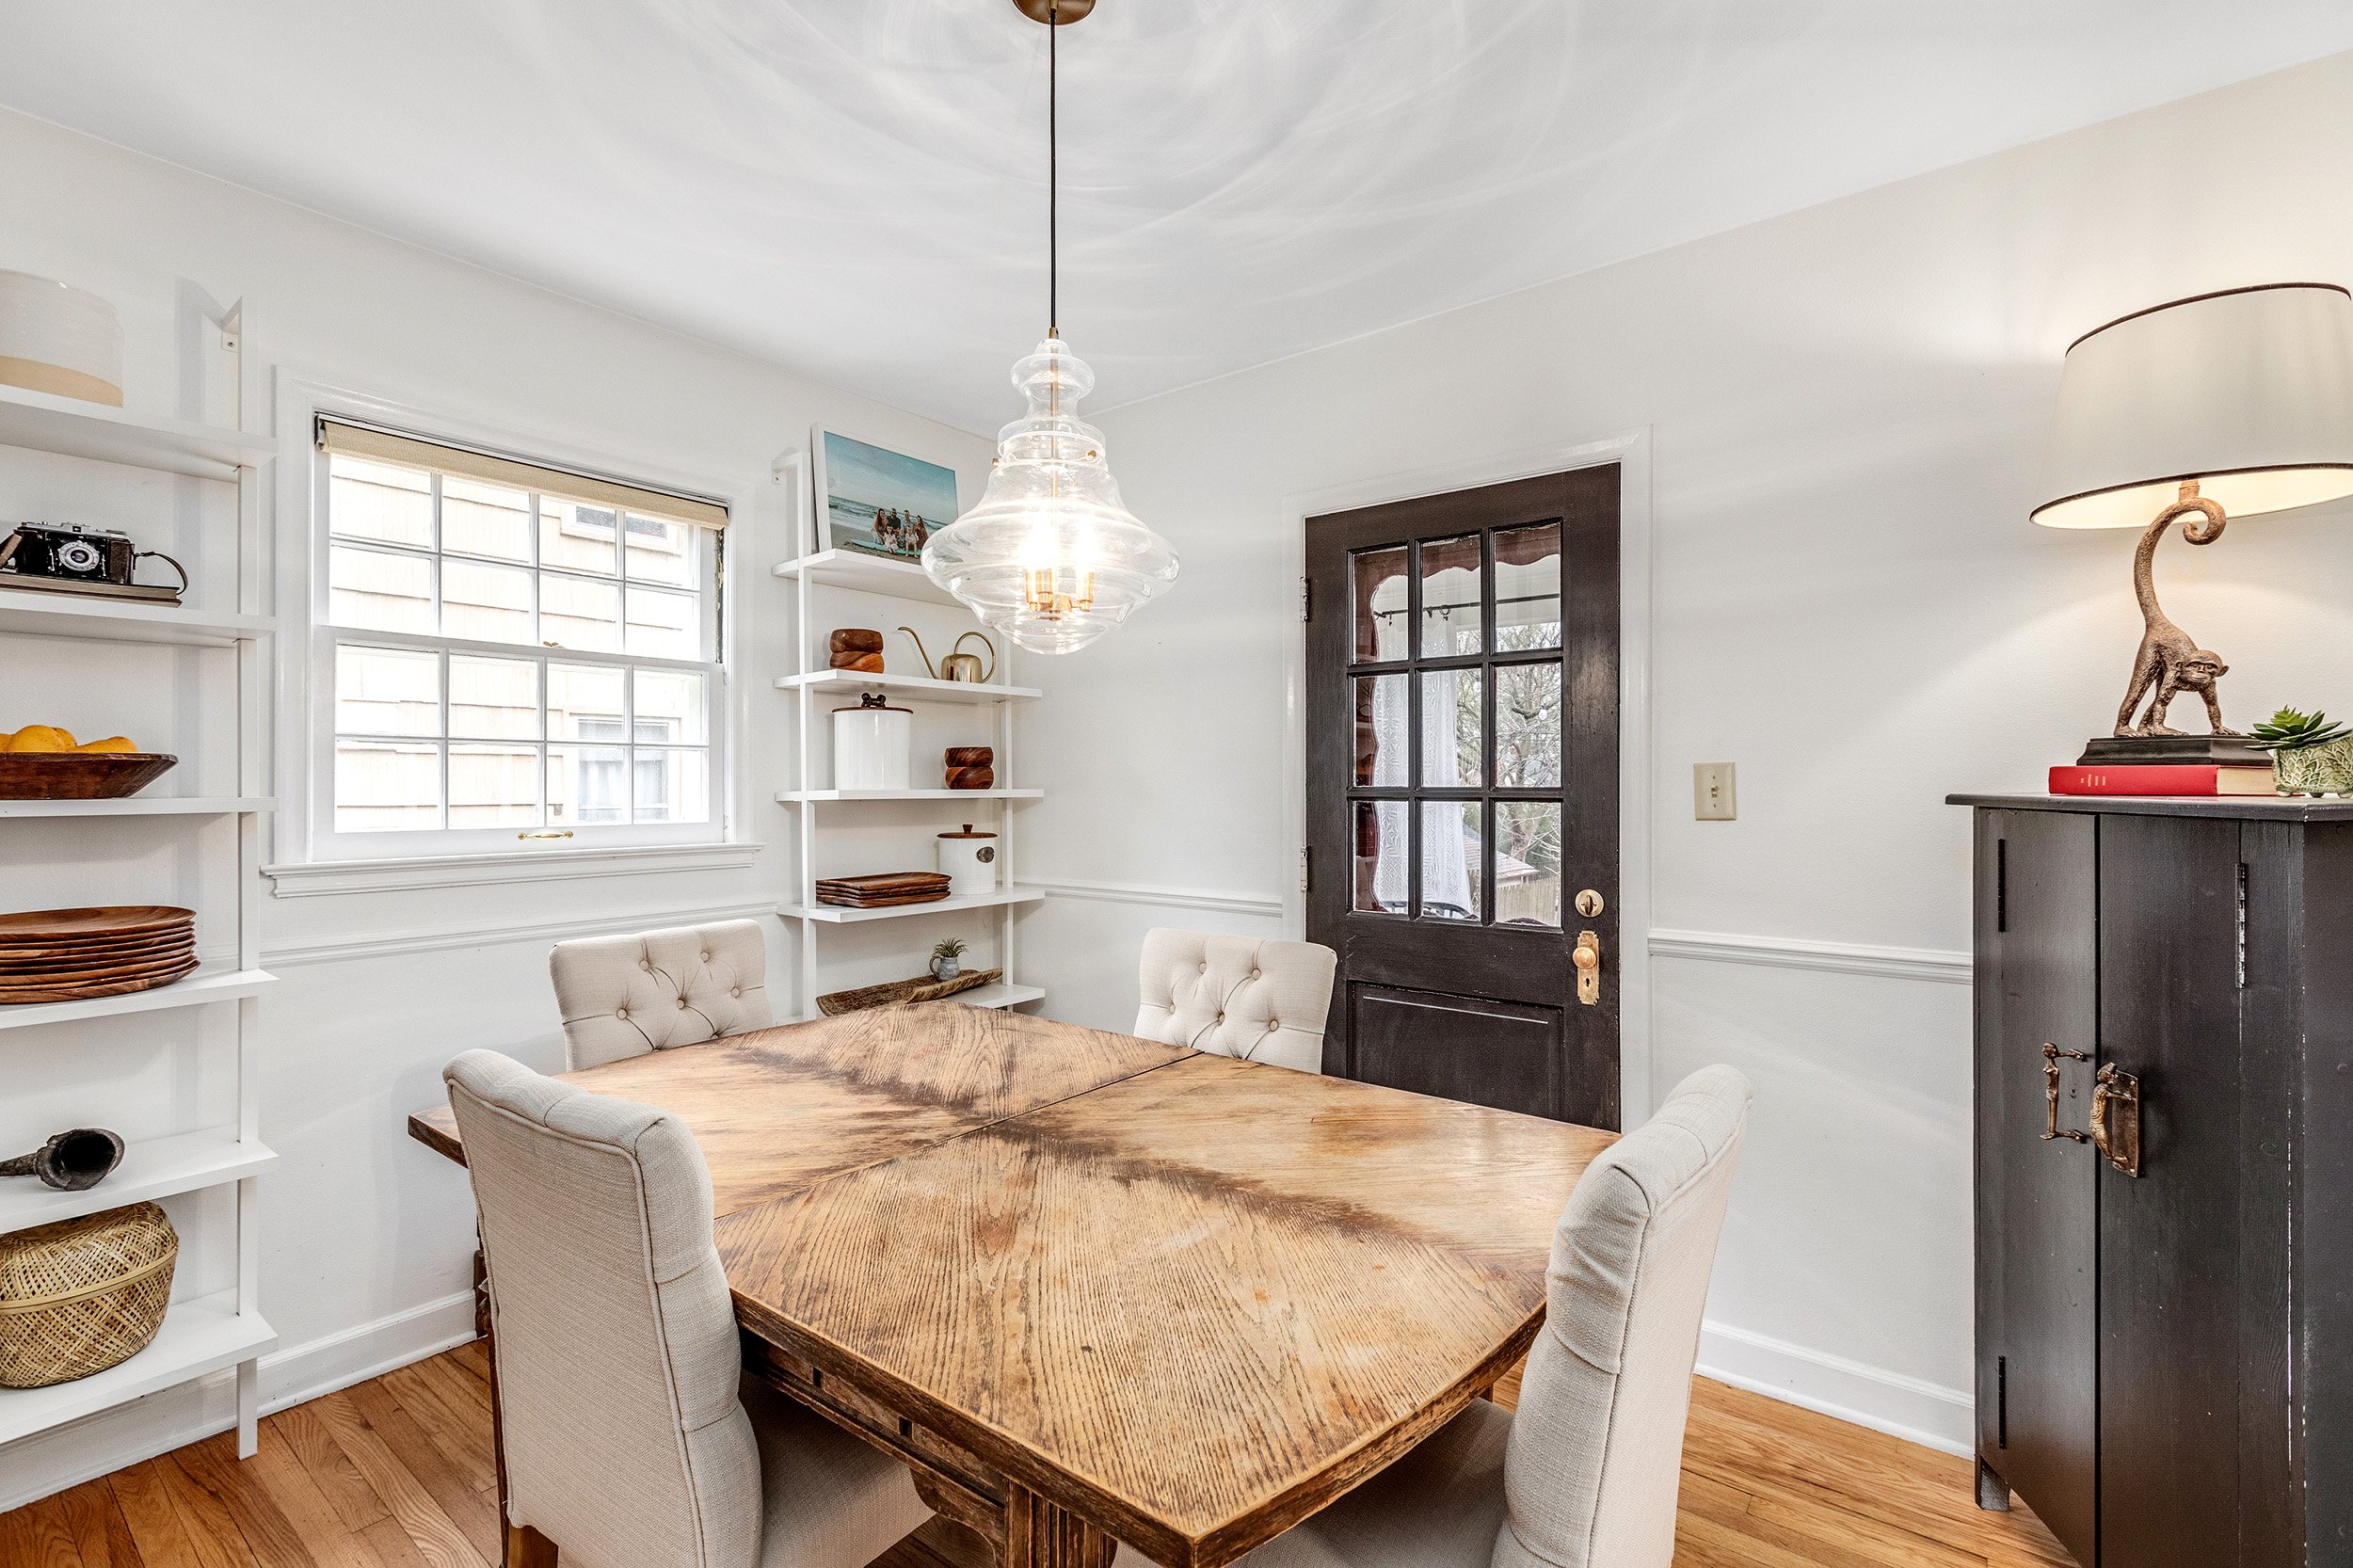  Ann Arbor Real Estate Photography - dining area 